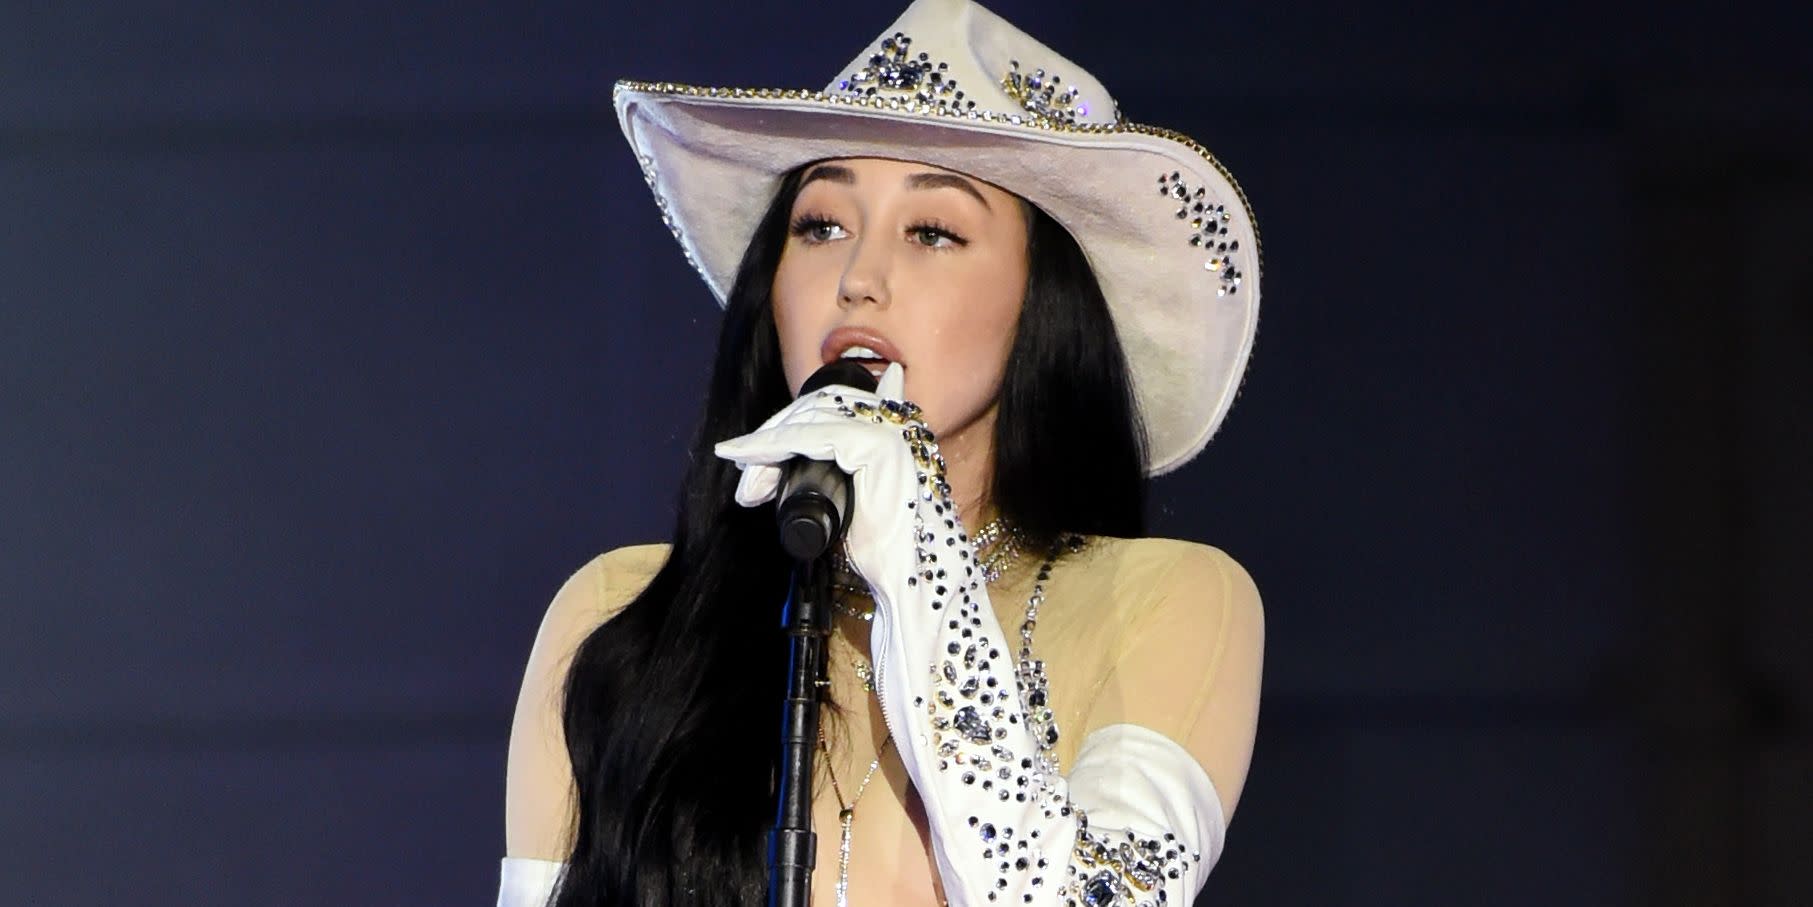 Noah Cyrus Wore a Naked Bodysuit at the CMT Awards Last Night